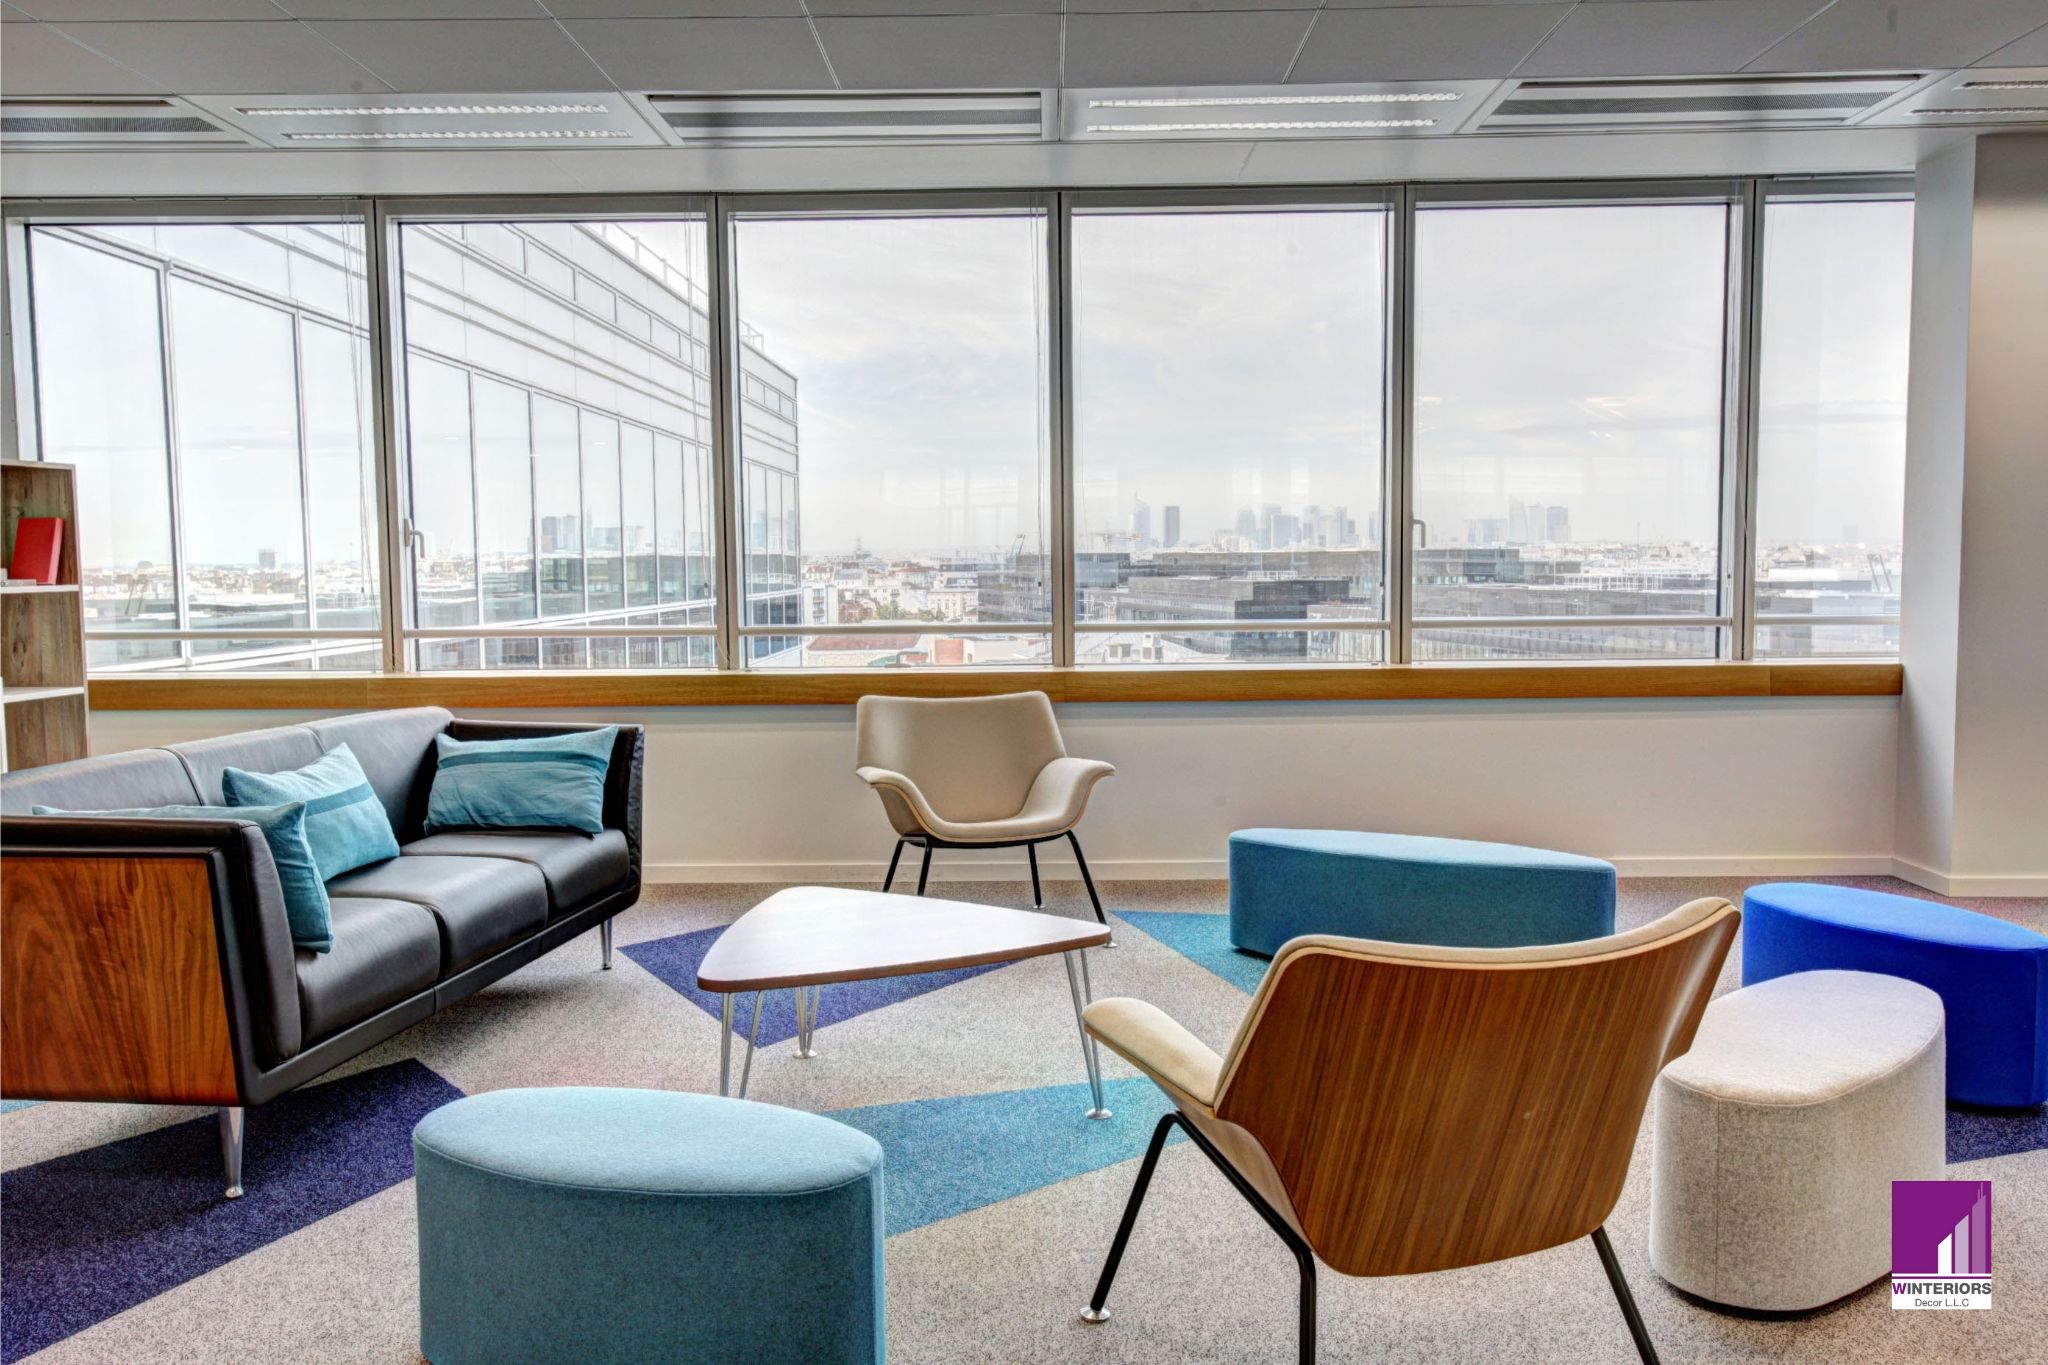 Why is Interior Design important for Office Spaces?